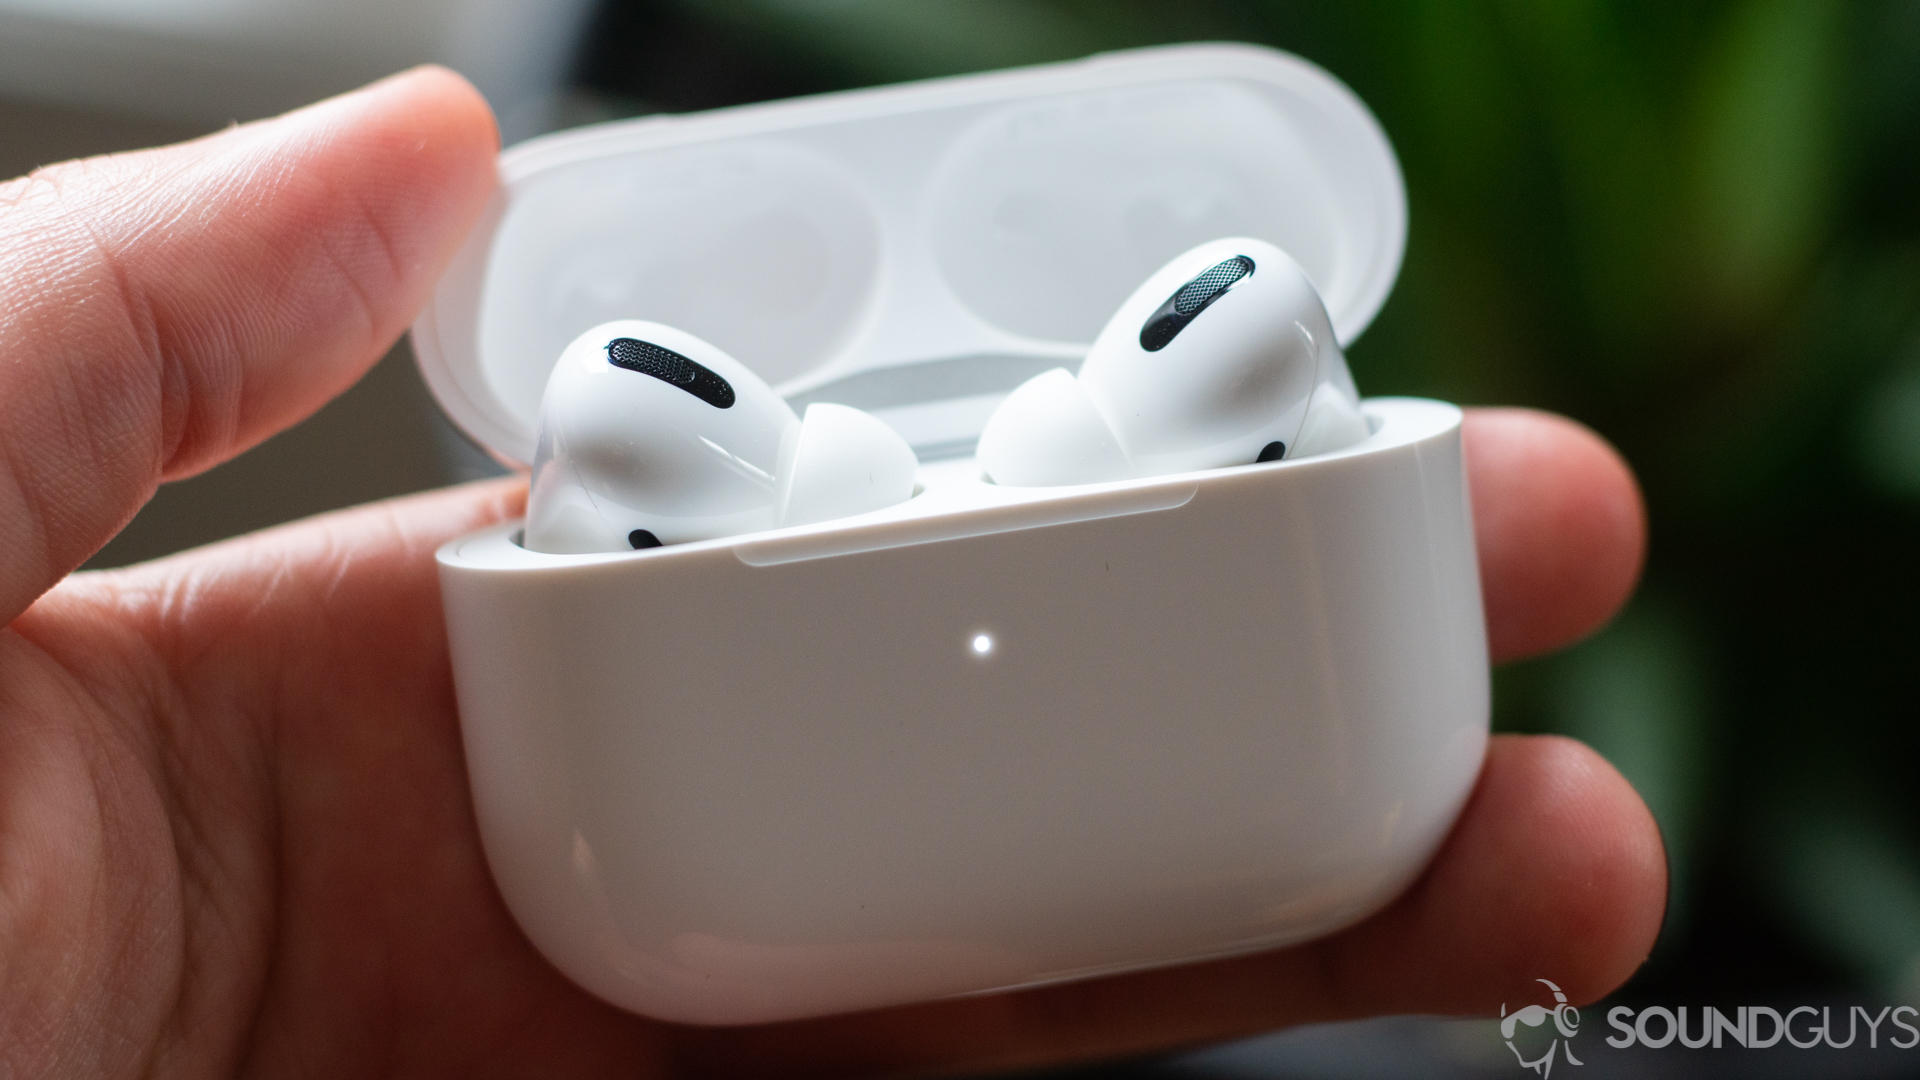 Apple AirPods Pro charging case in man's hand.